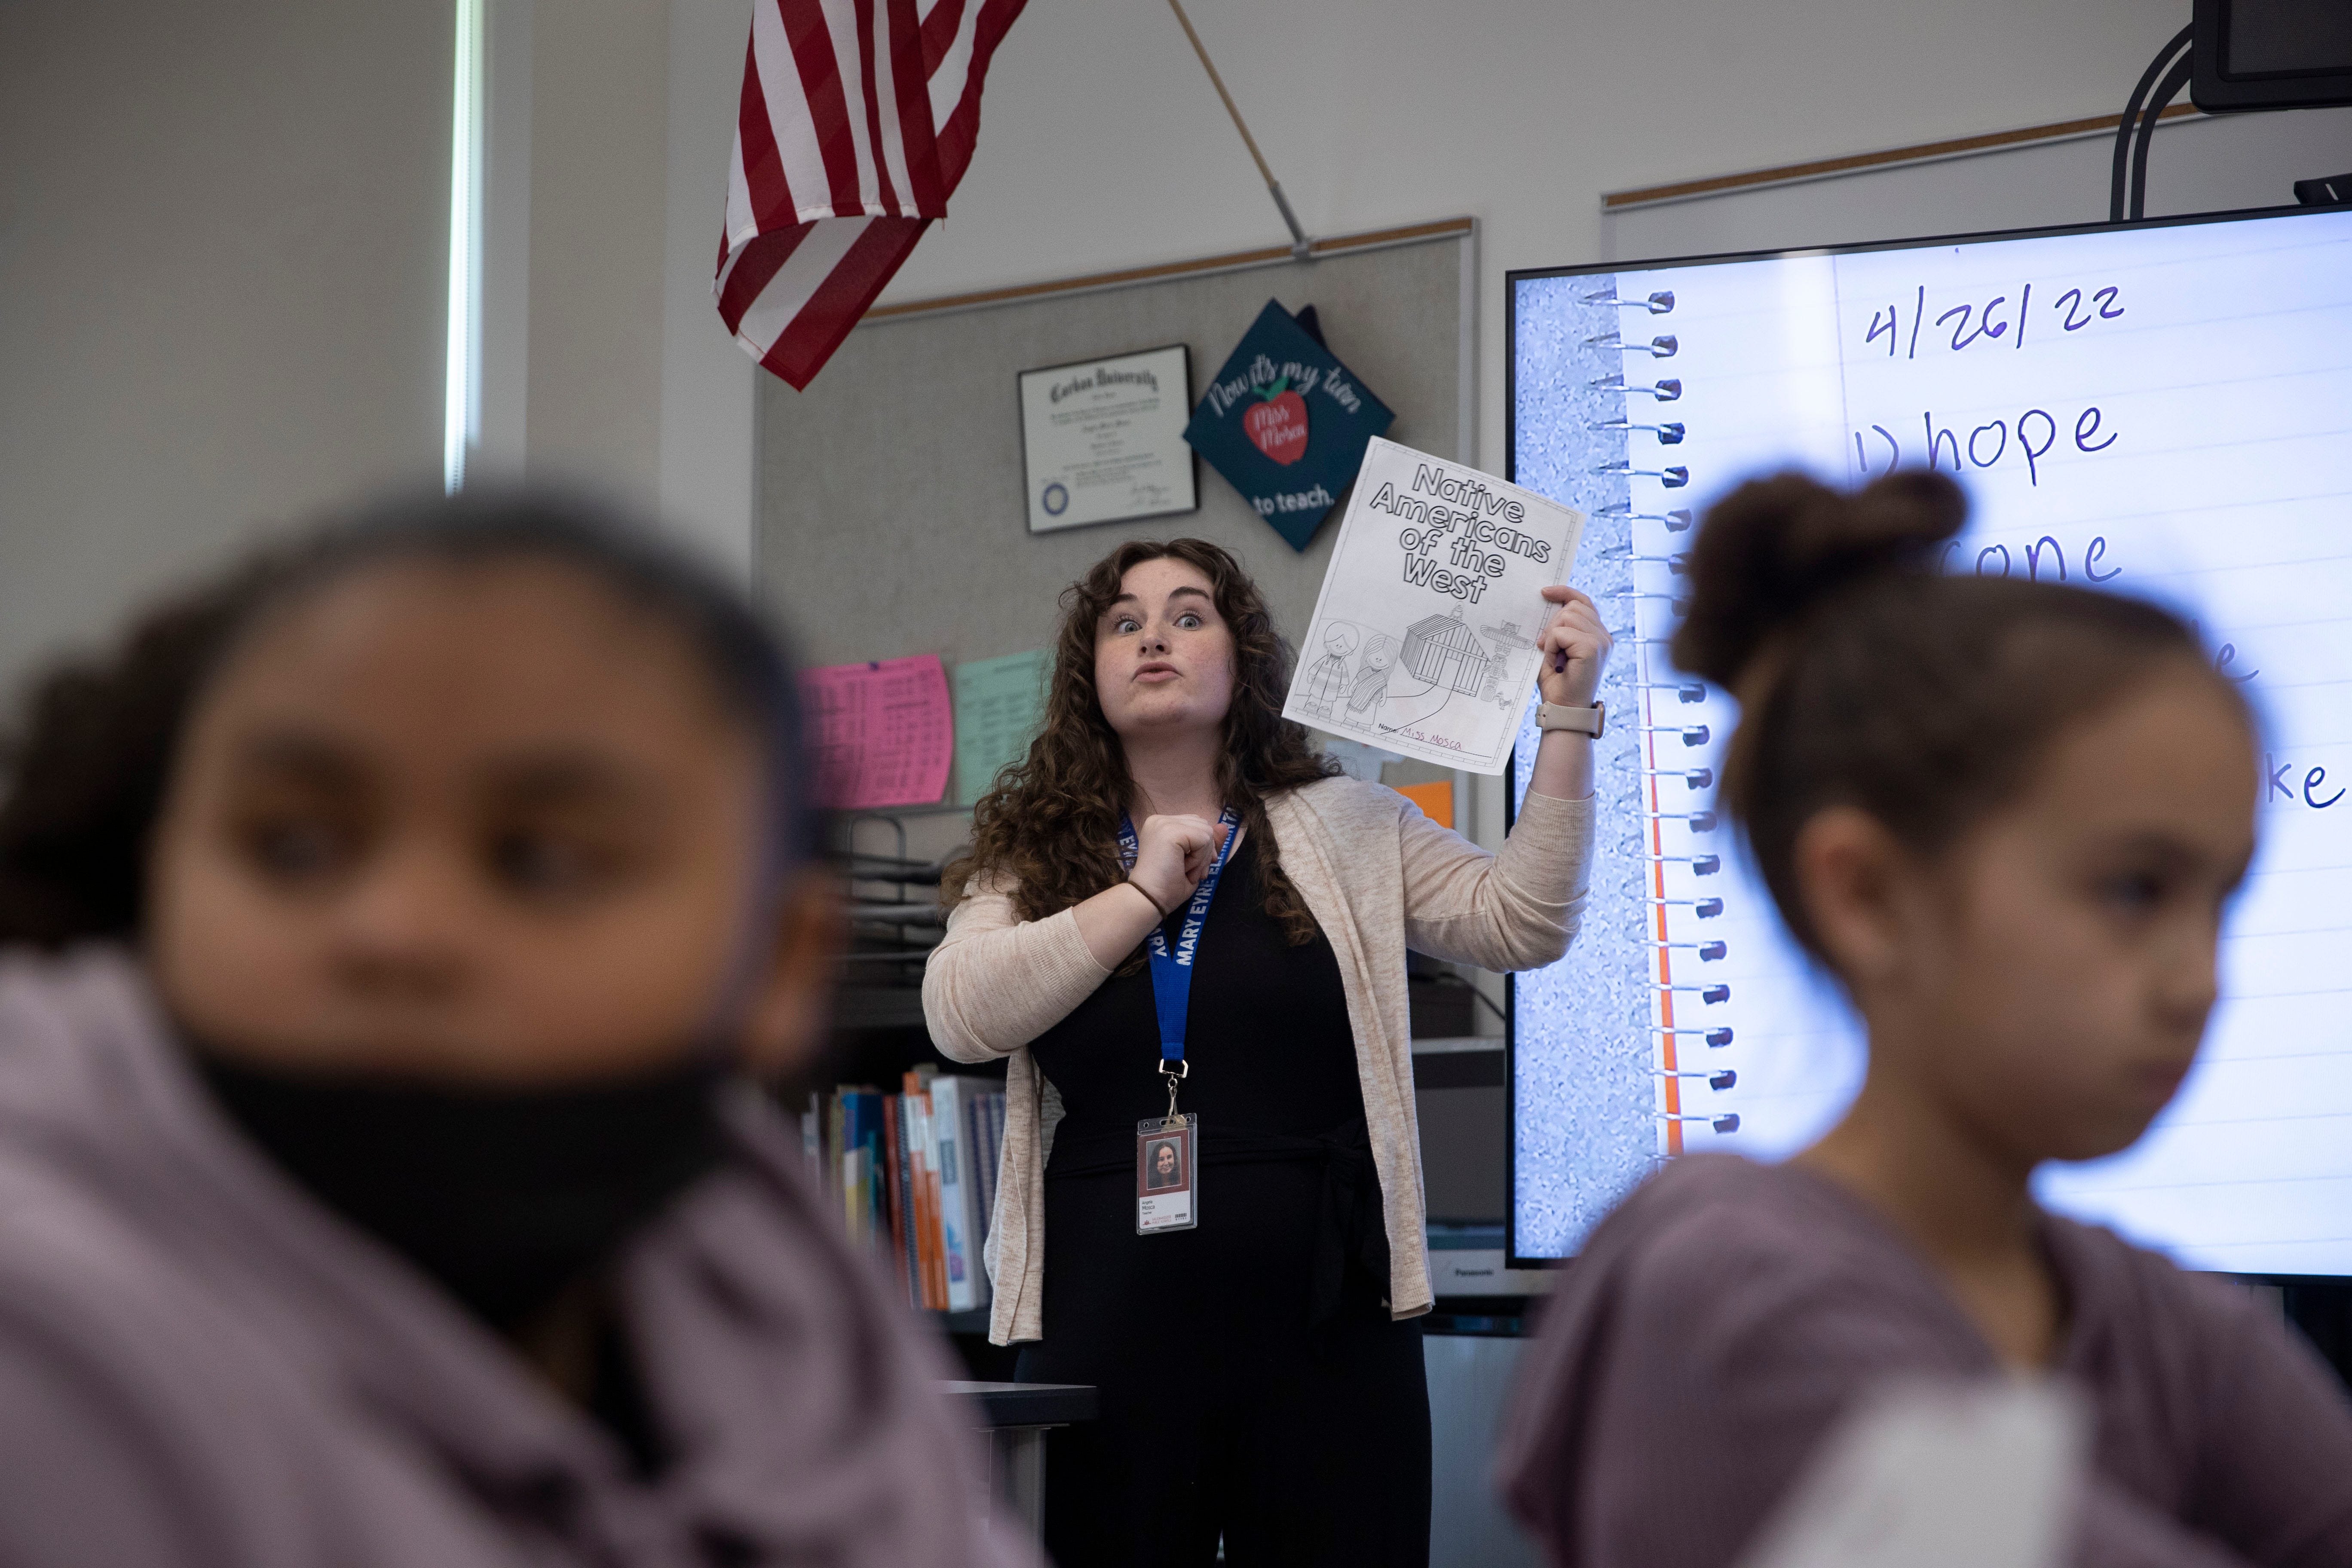 Teacher Angela Mosca instructs students to get out a reading guide during a reading skills lesson at Mary Eyre Elementary School in Salem, Ore., on Tuesday, April 26, 2022.